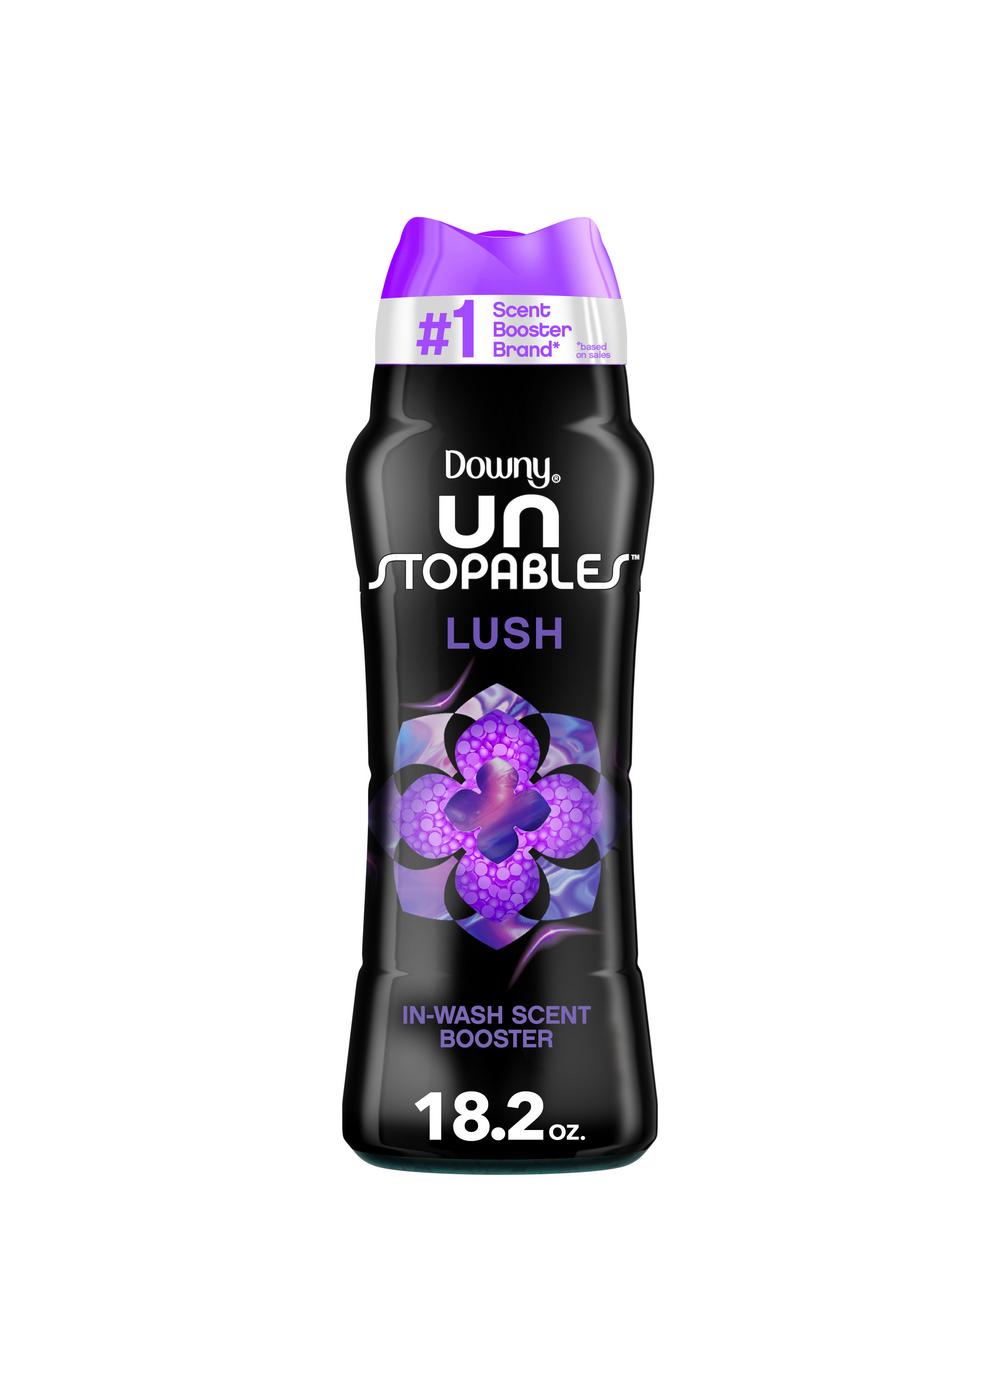 Downy Unstopables In-Wash Scent Booster - Lush; image 1 of 5